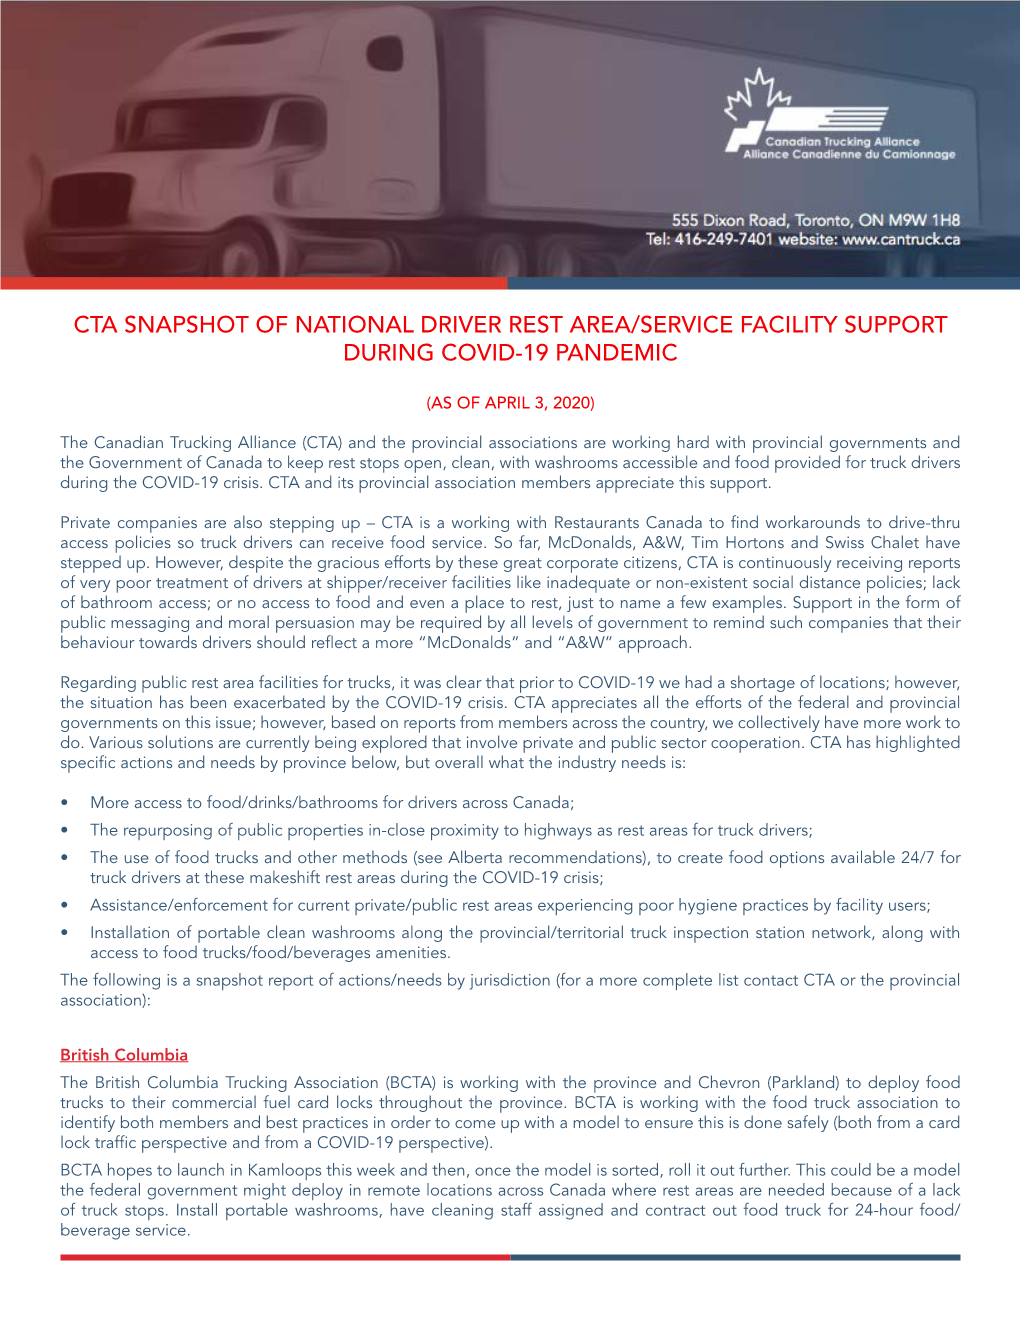 Cta Snapshot of National Driver Rest Area/Service Facility Support During Covid-19 Pandemic